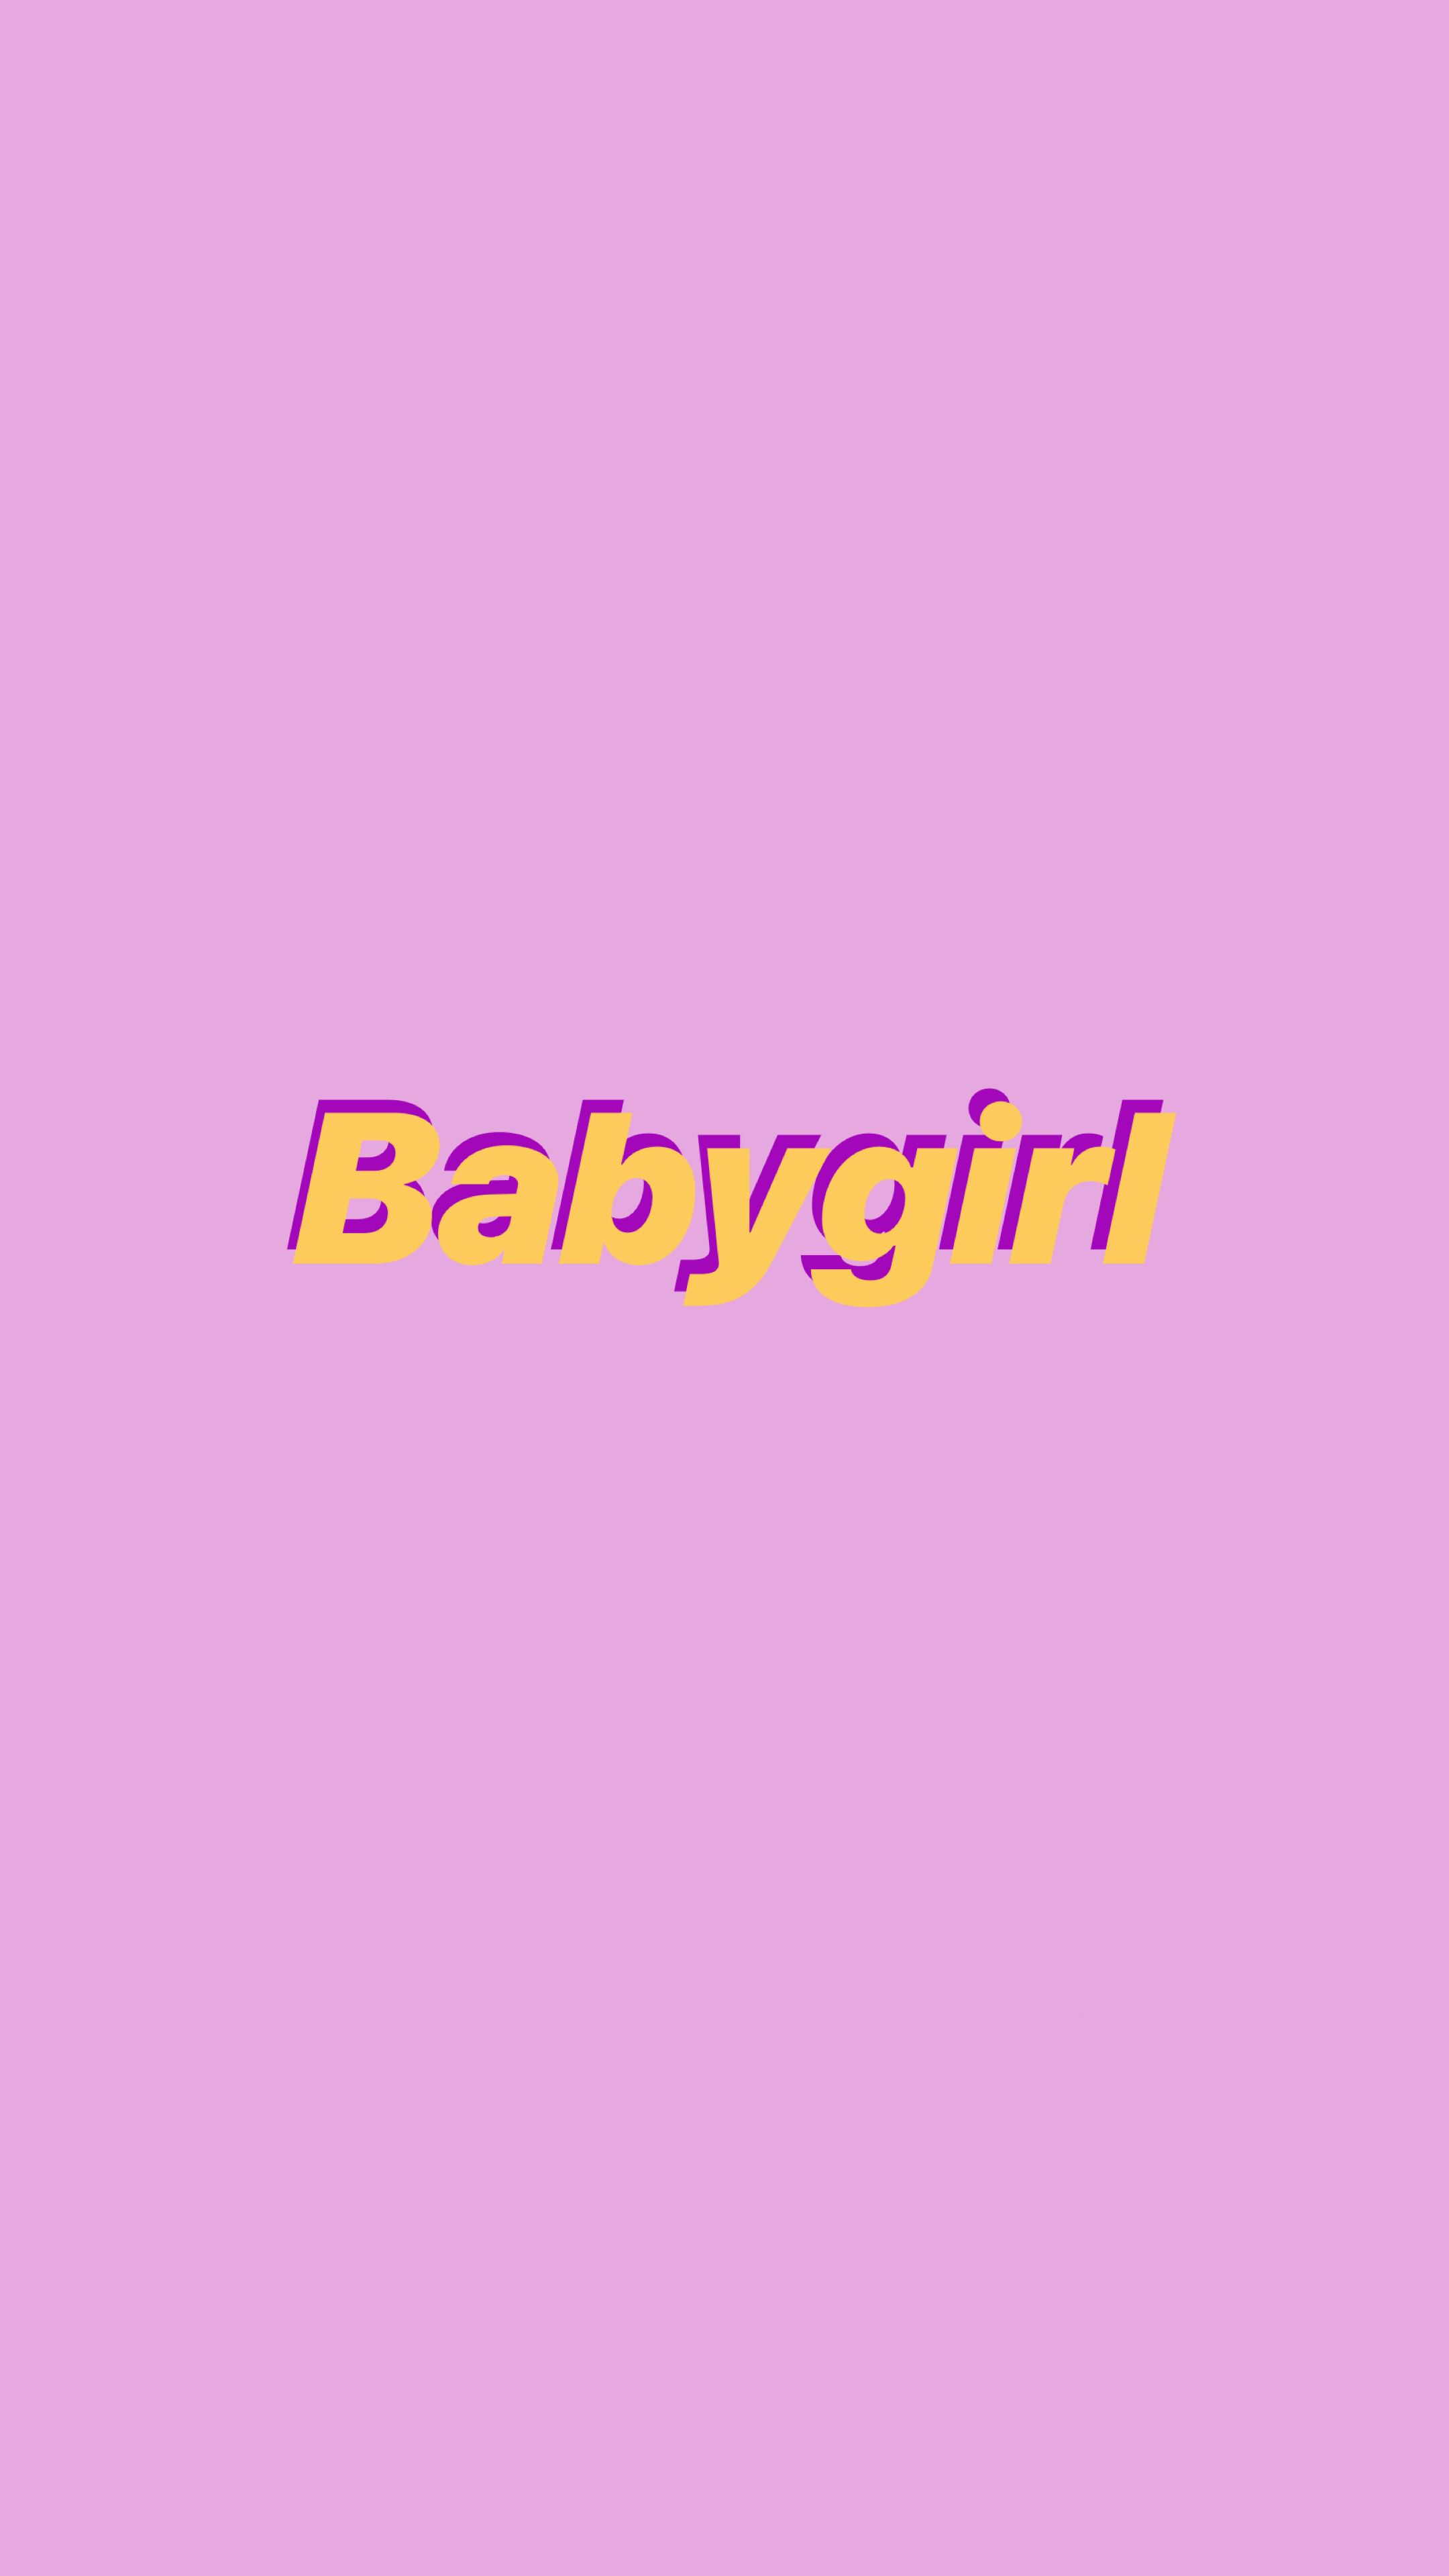 Girly Phone wallpaper // iphone background. iPhone wallpaper girly, Wallpaper iphone cute, iPhone background tumblr